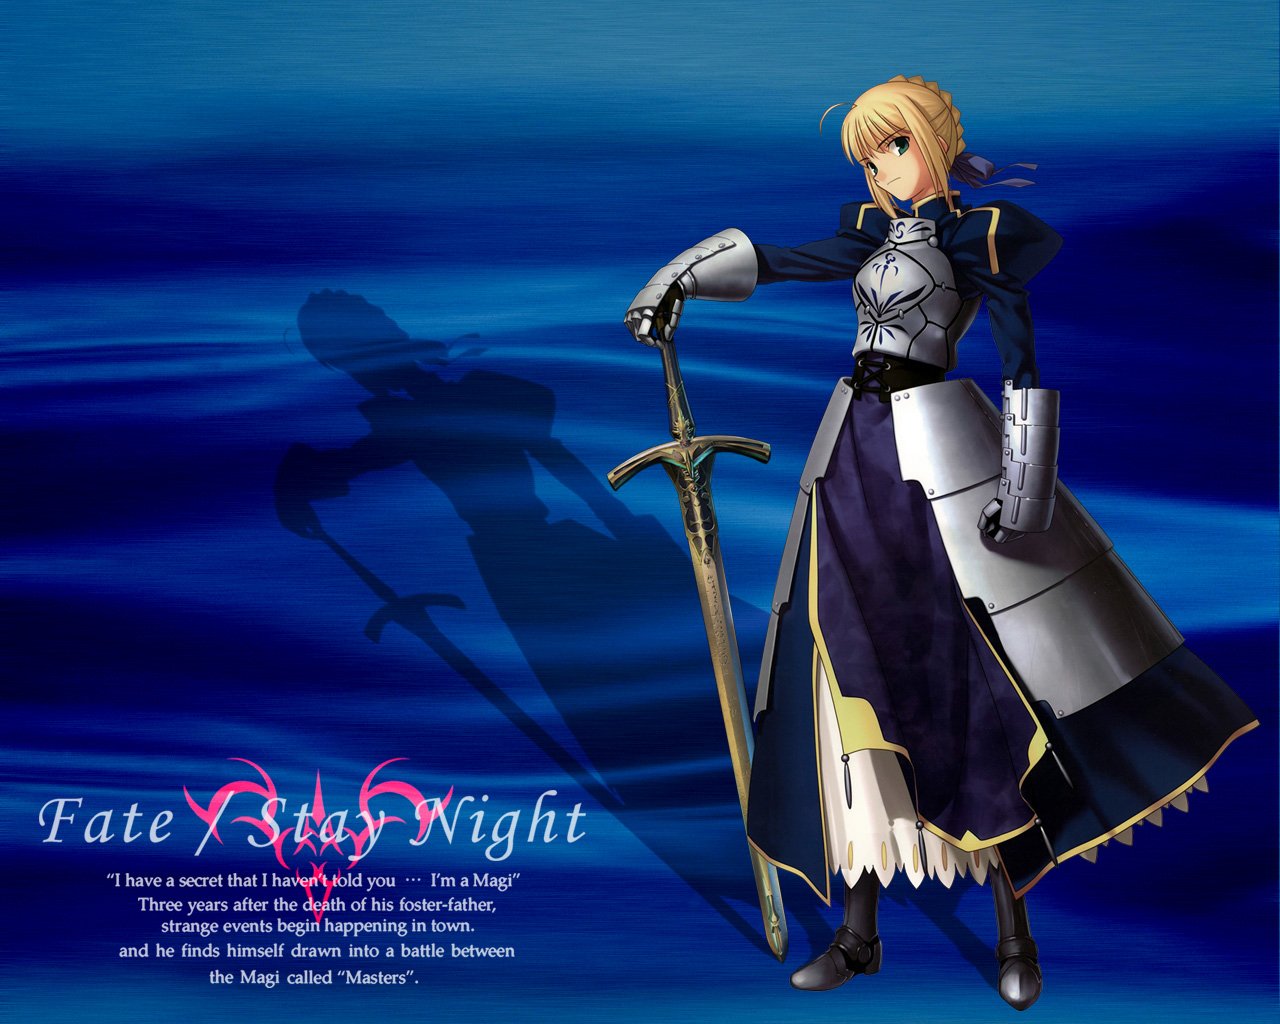 Saber (Fate Series) Anime Fate/Stay Night Image